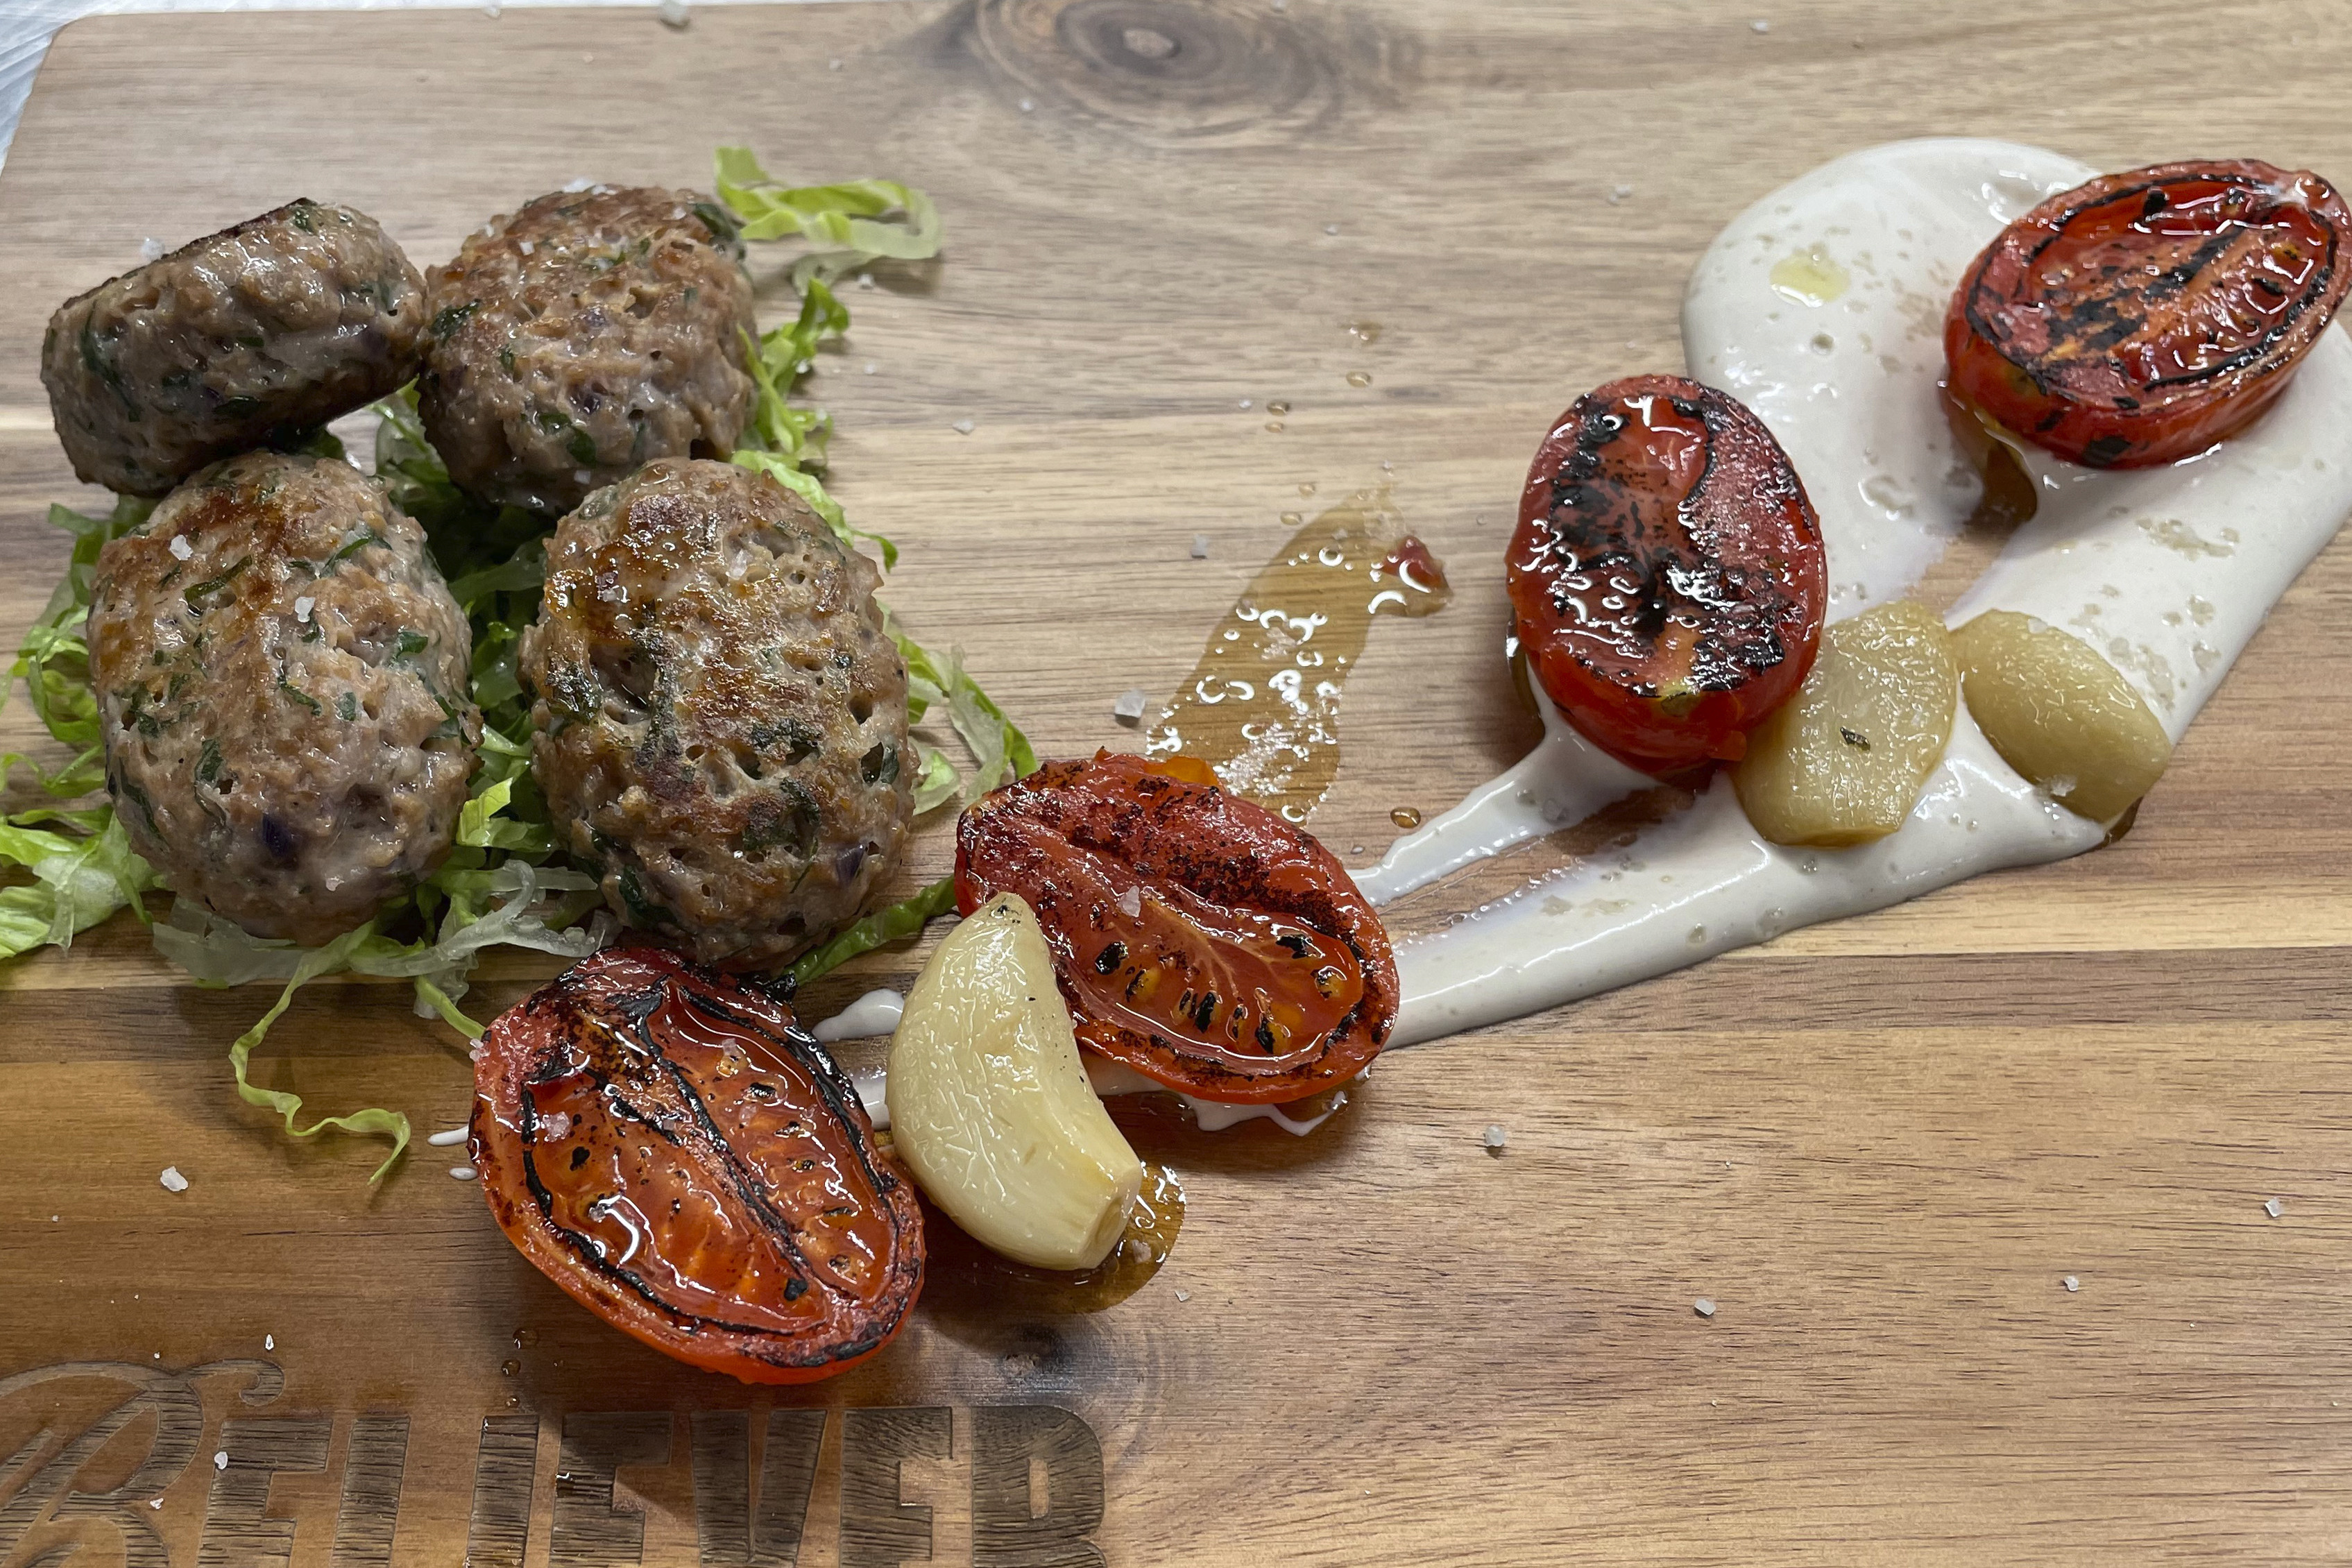 A dish made from the Believer Meats’ cultivated lamb product at a test kitchen in Rehovot, Israel. Believer Meats is one of a growing number of companies making lab-grown meat, which can be produced without raising and killing animals. Photo: AP